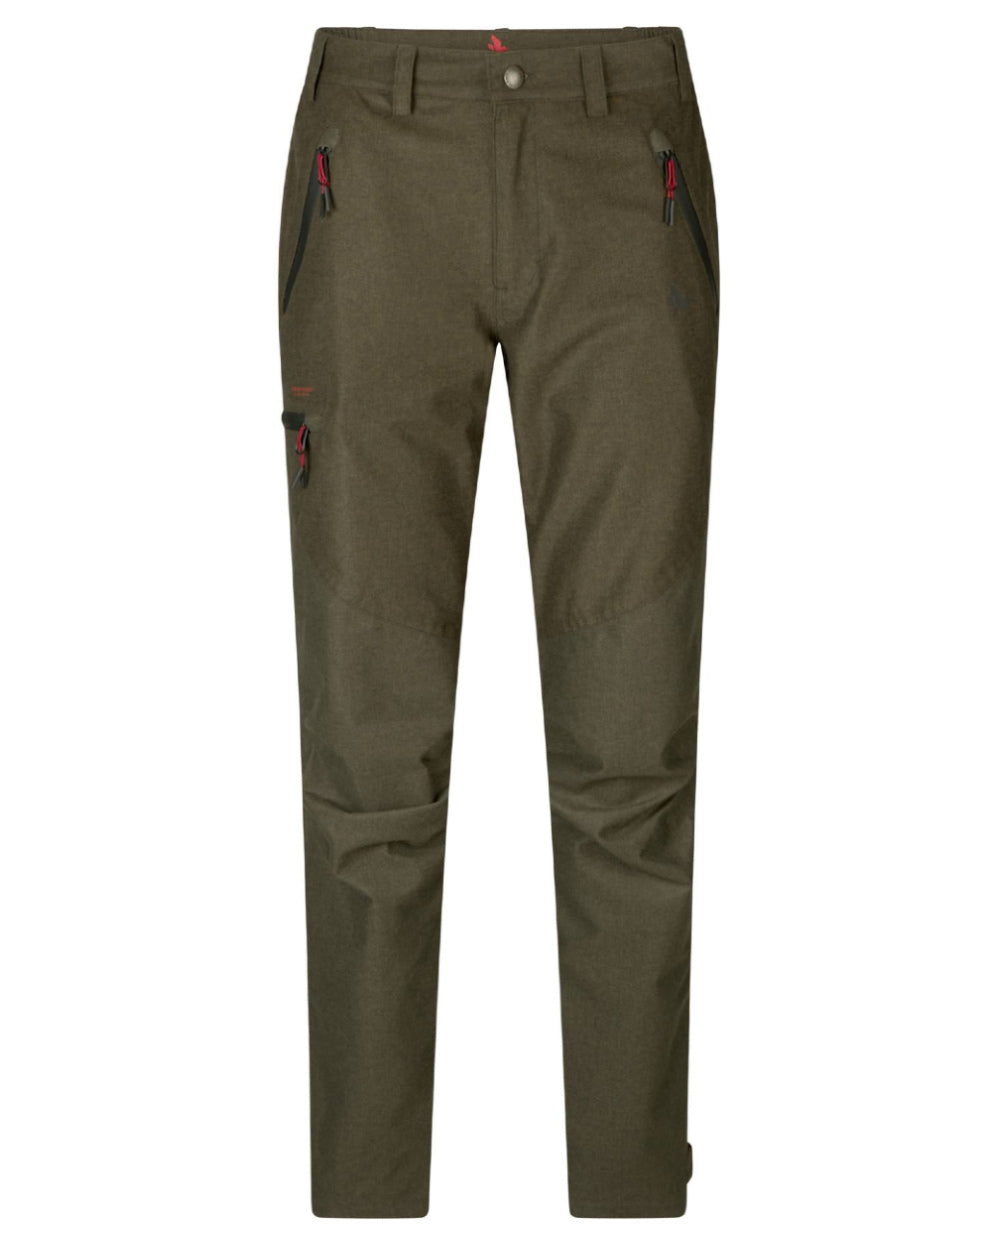 Pine Green Melange Coloured Seeland Womens Avail Trousers On A White Background